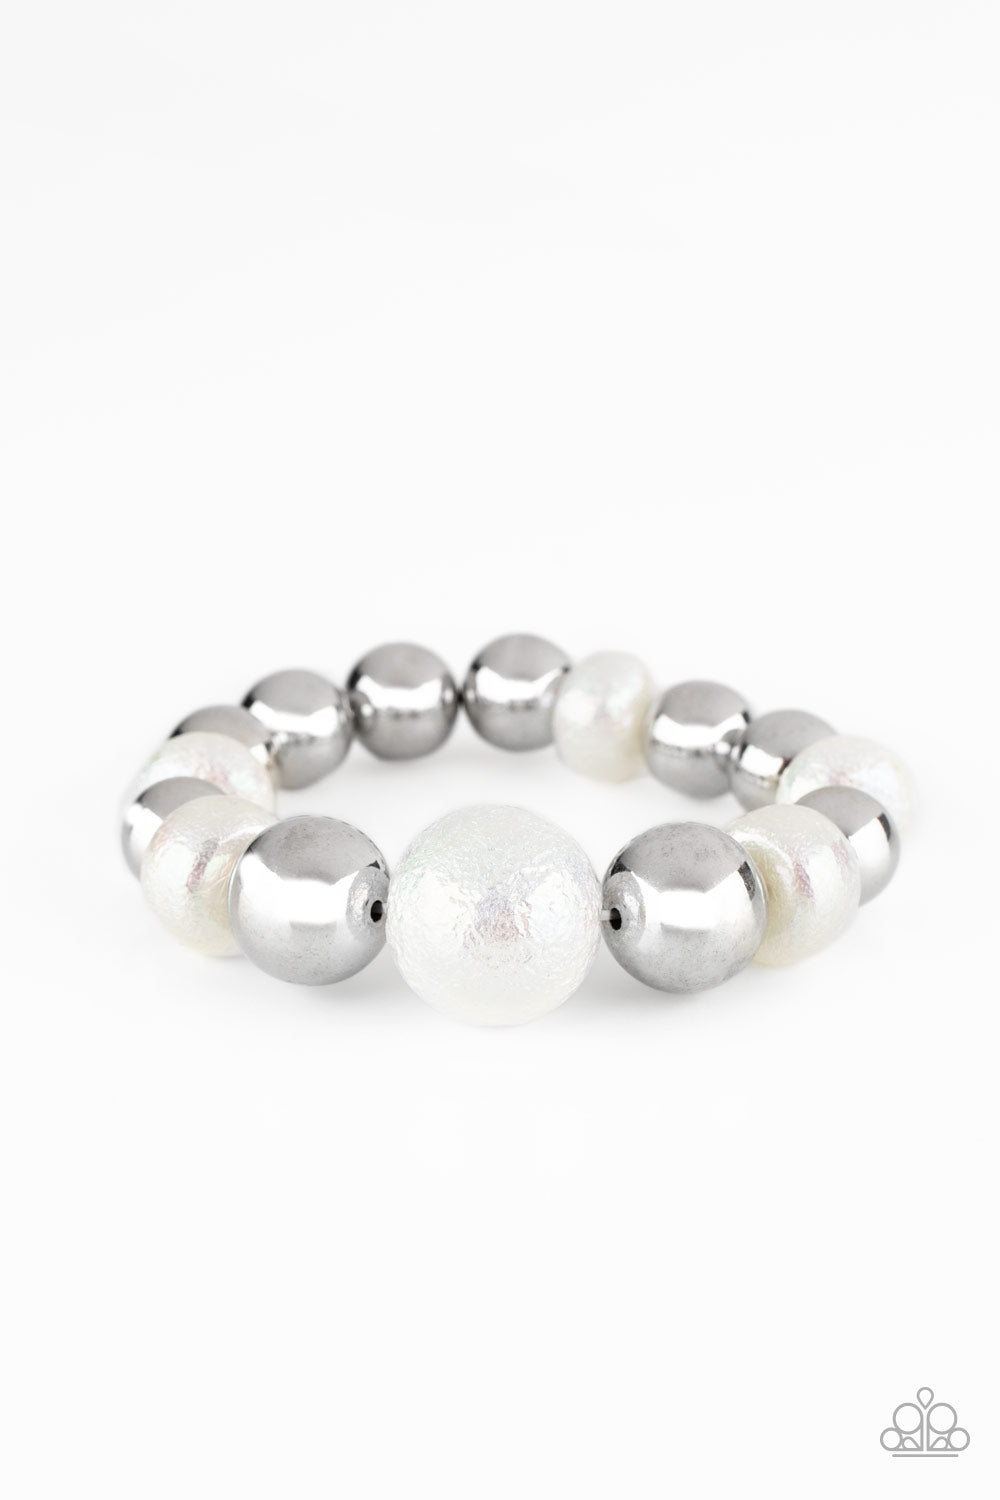 Starstruck Shimmer White Bracelet- Paparazzi Accessories.  Brushed in a stellar iridescence, hammered pearly beads and classic silver beads gradually increase in size as they slide along a stretchy band around the wrist for a glamorous look. All Paparazzi Accessories are lead free and nickel free!  Sold as one individual bracelet.  Get The Complete Look! Necklace: "Twinkle Twinkle, I'm The Star - White" (Sold Separately)